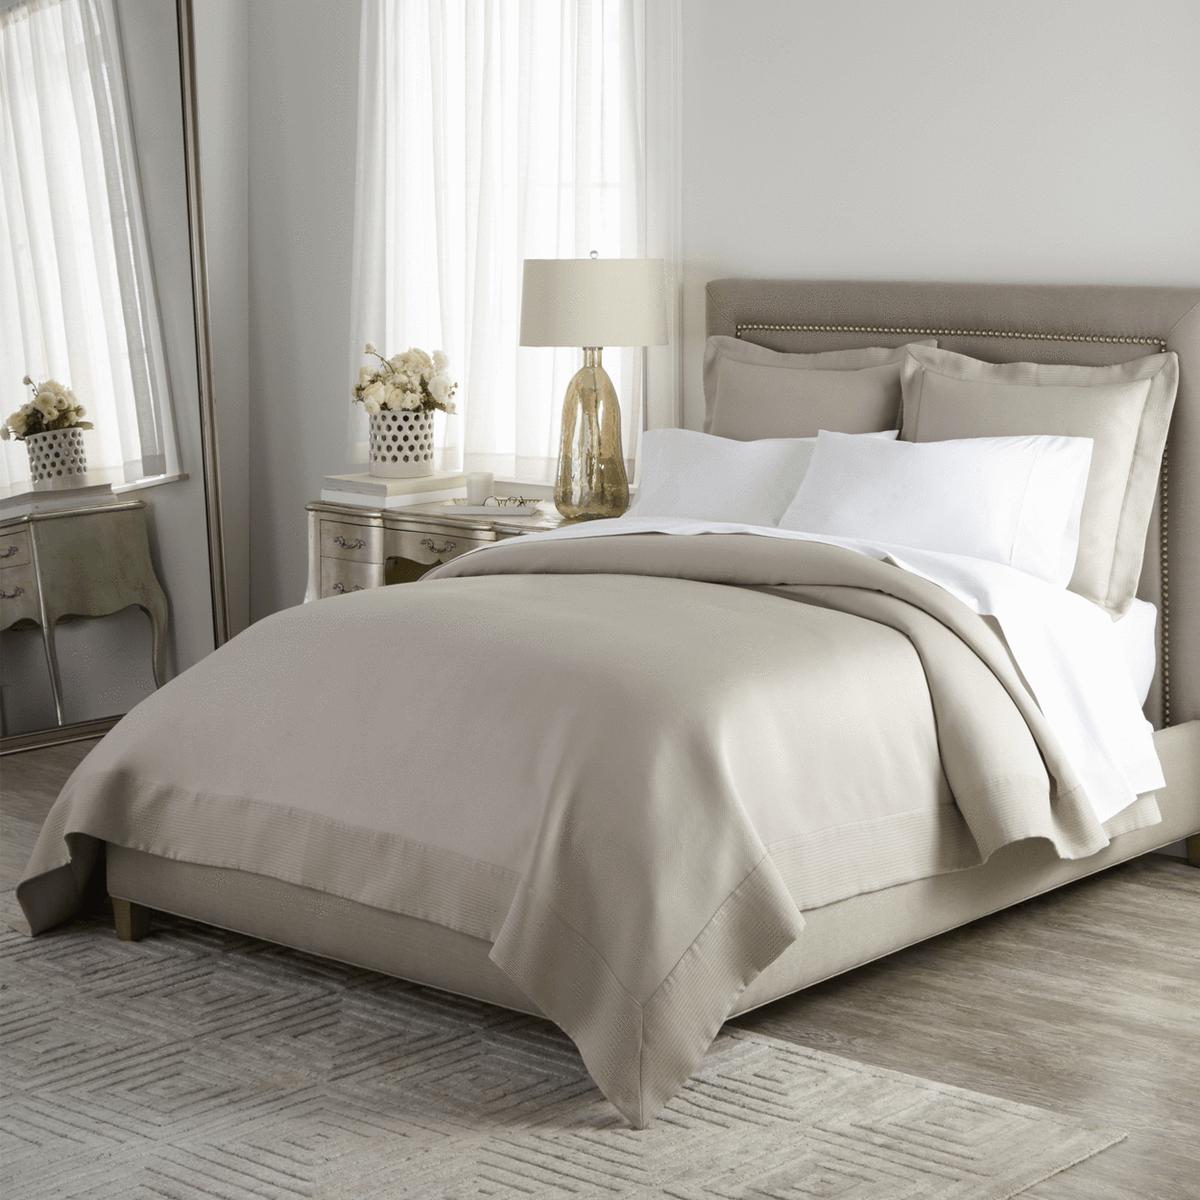 Peacock Alley Angelina Matelasse Bedding Full Bed Lifestyle White Fine Linens